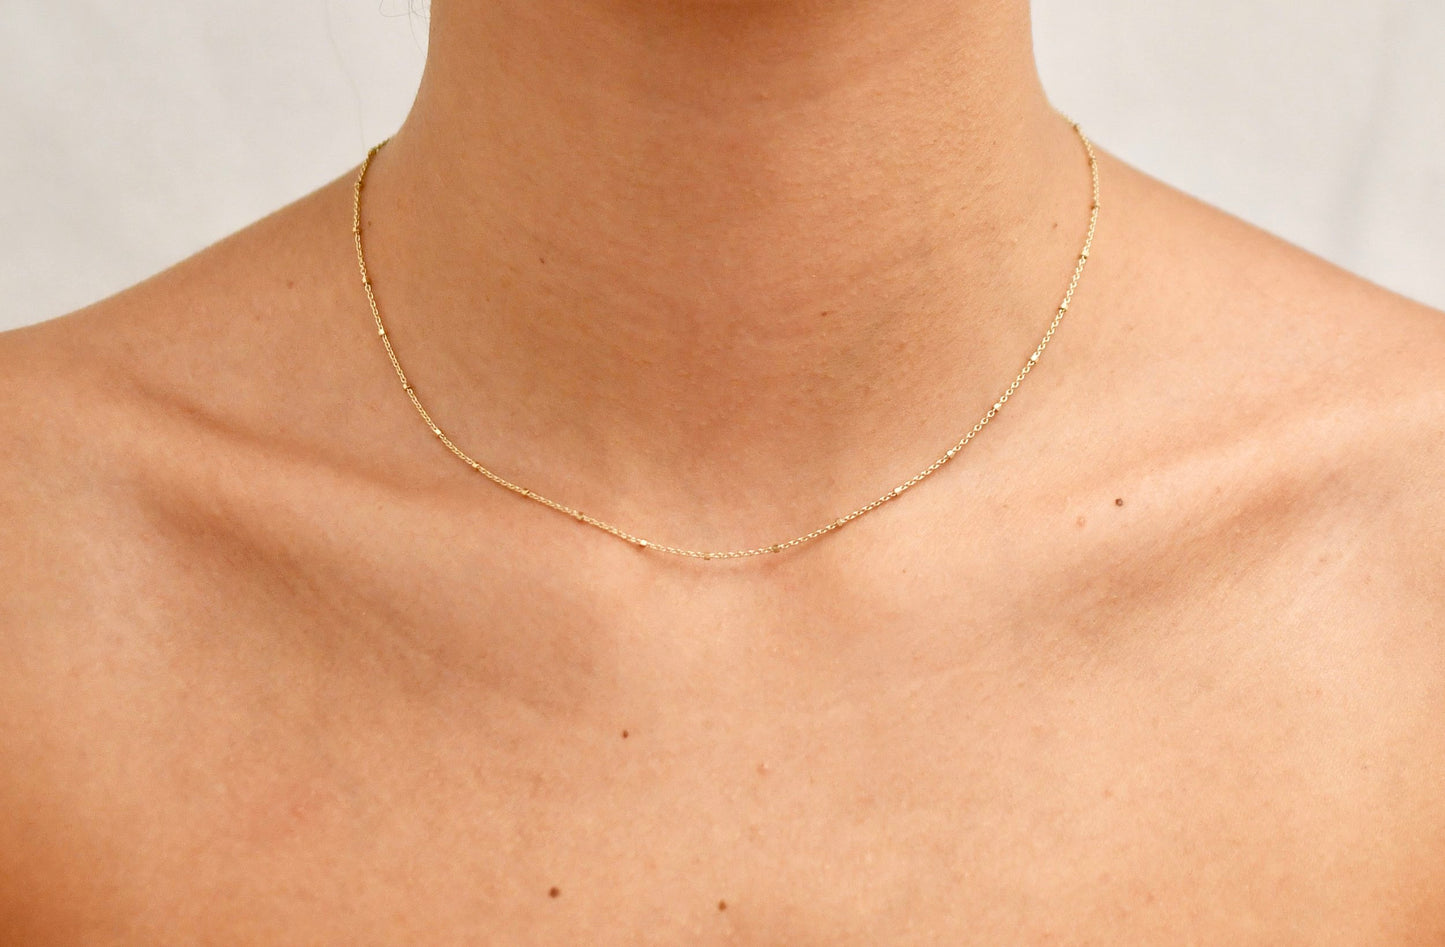 Sterling Choker Necklace - Tiny Satellite Chain